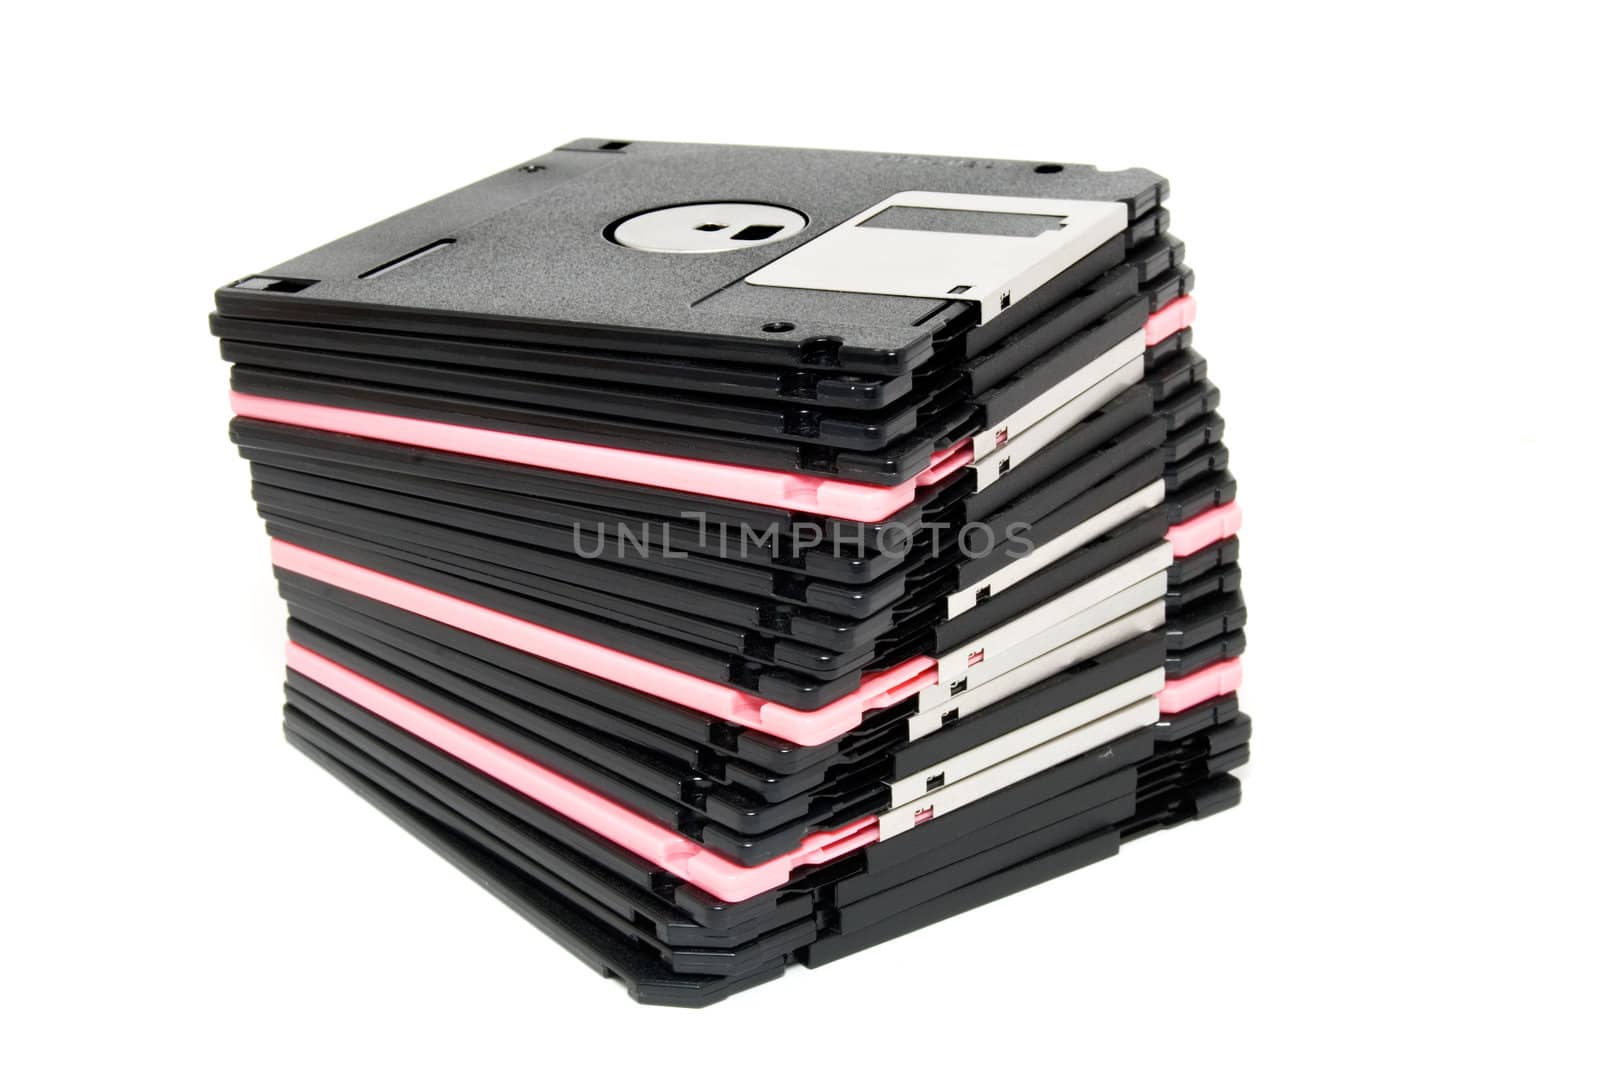 Diskettes photographed on a white background